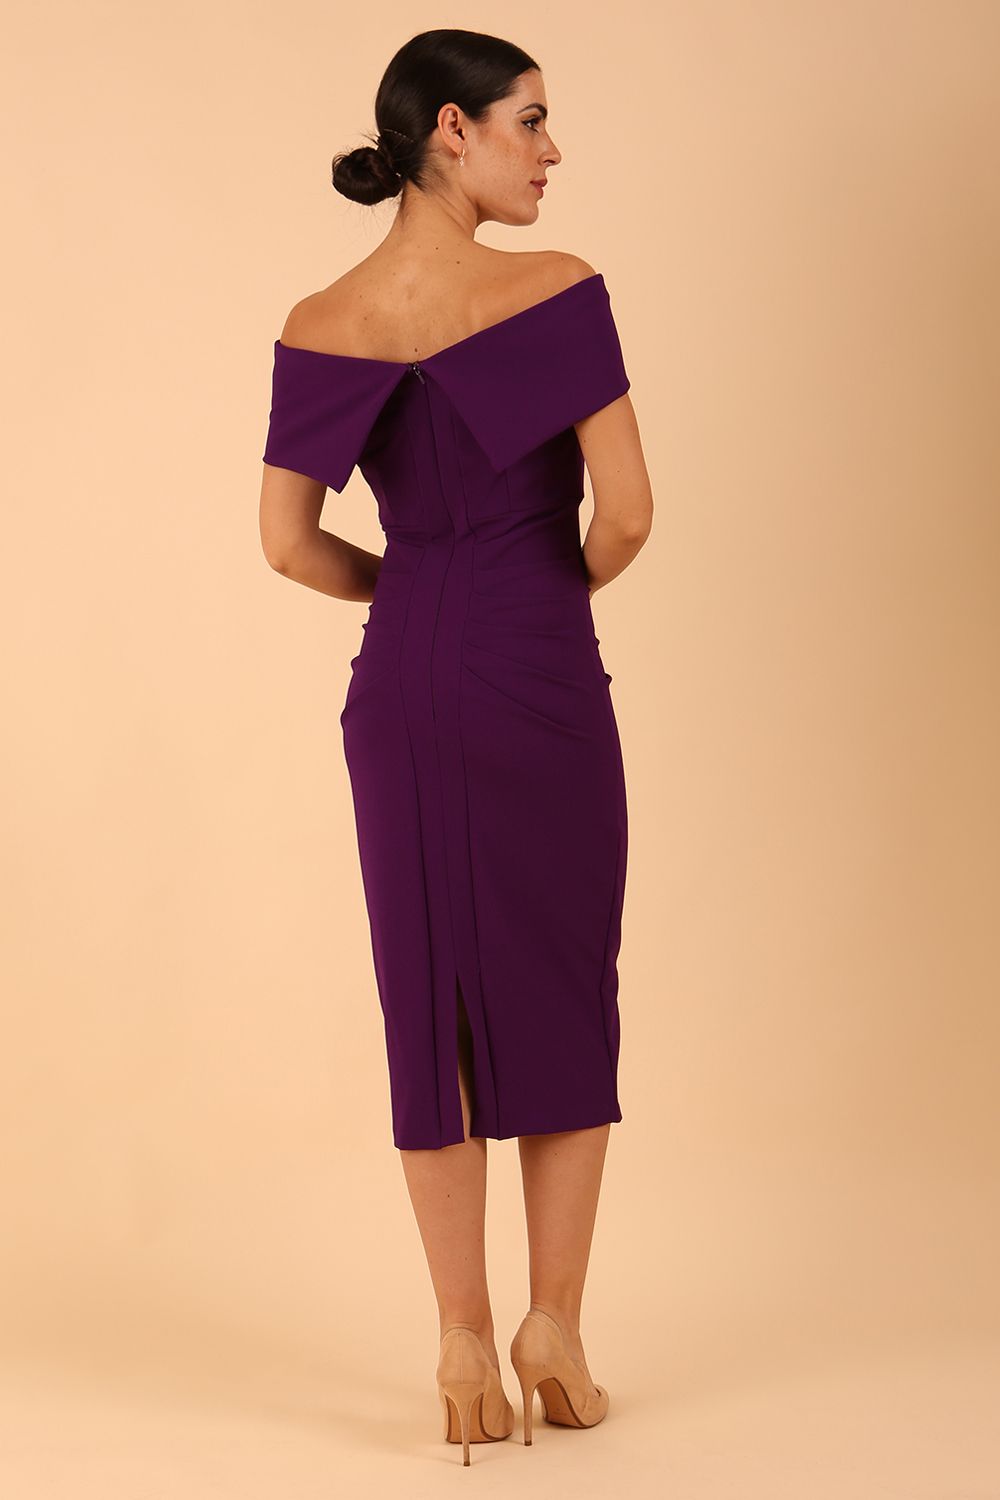 model is wearing diva catwalk amelia pencil dress with bardot neckline and ruched back in Passion Purple back